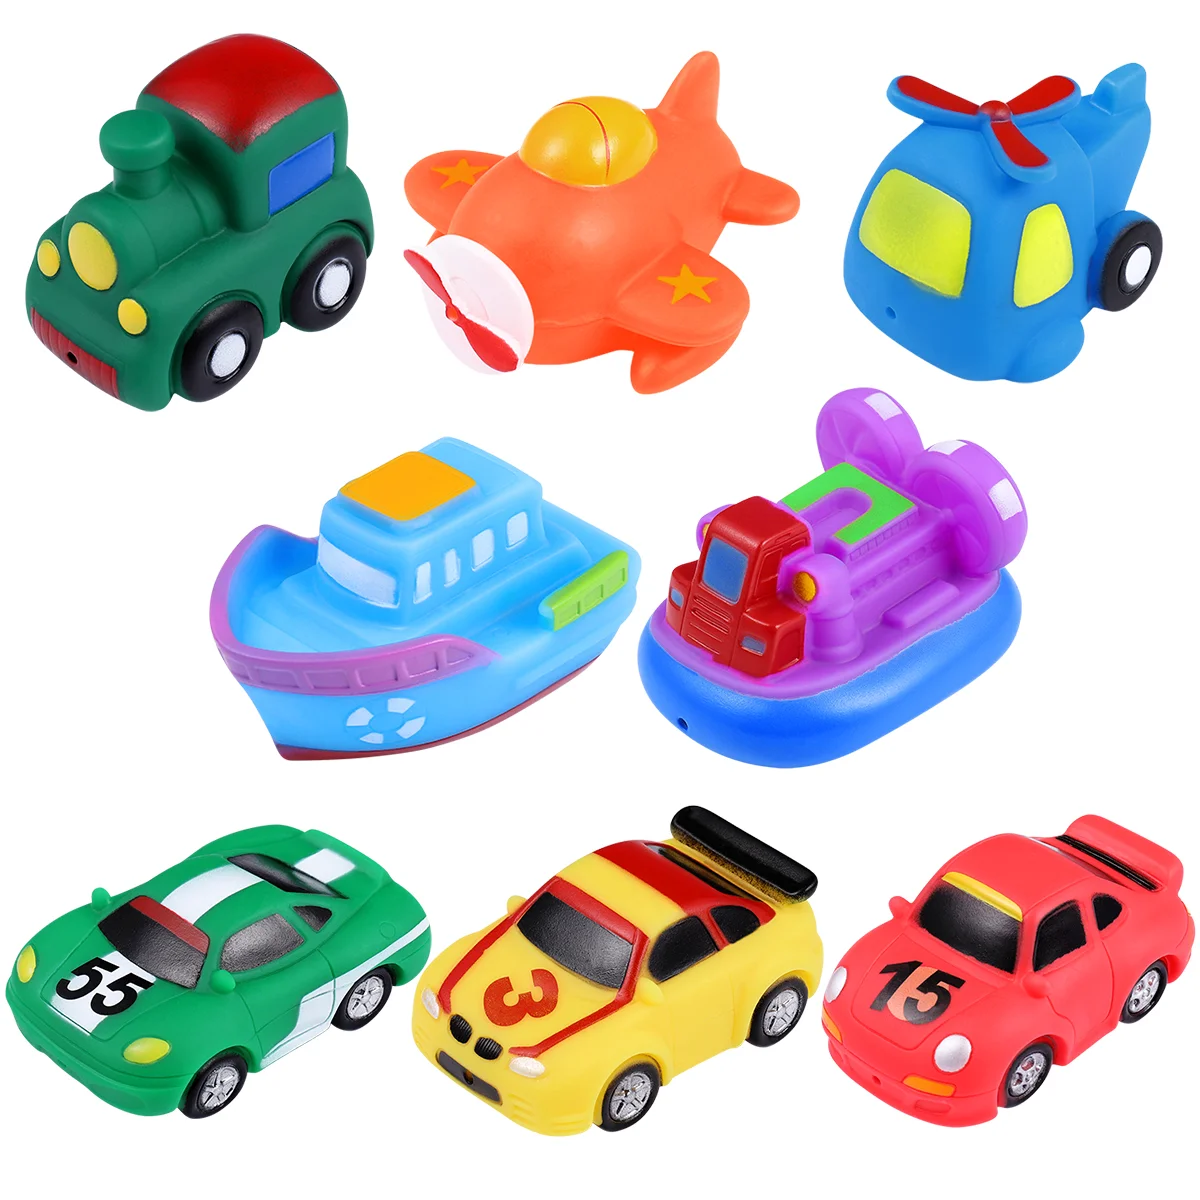 

8PCS Bath , Vehicles Squeeze and Bathtub Squirters for Kids